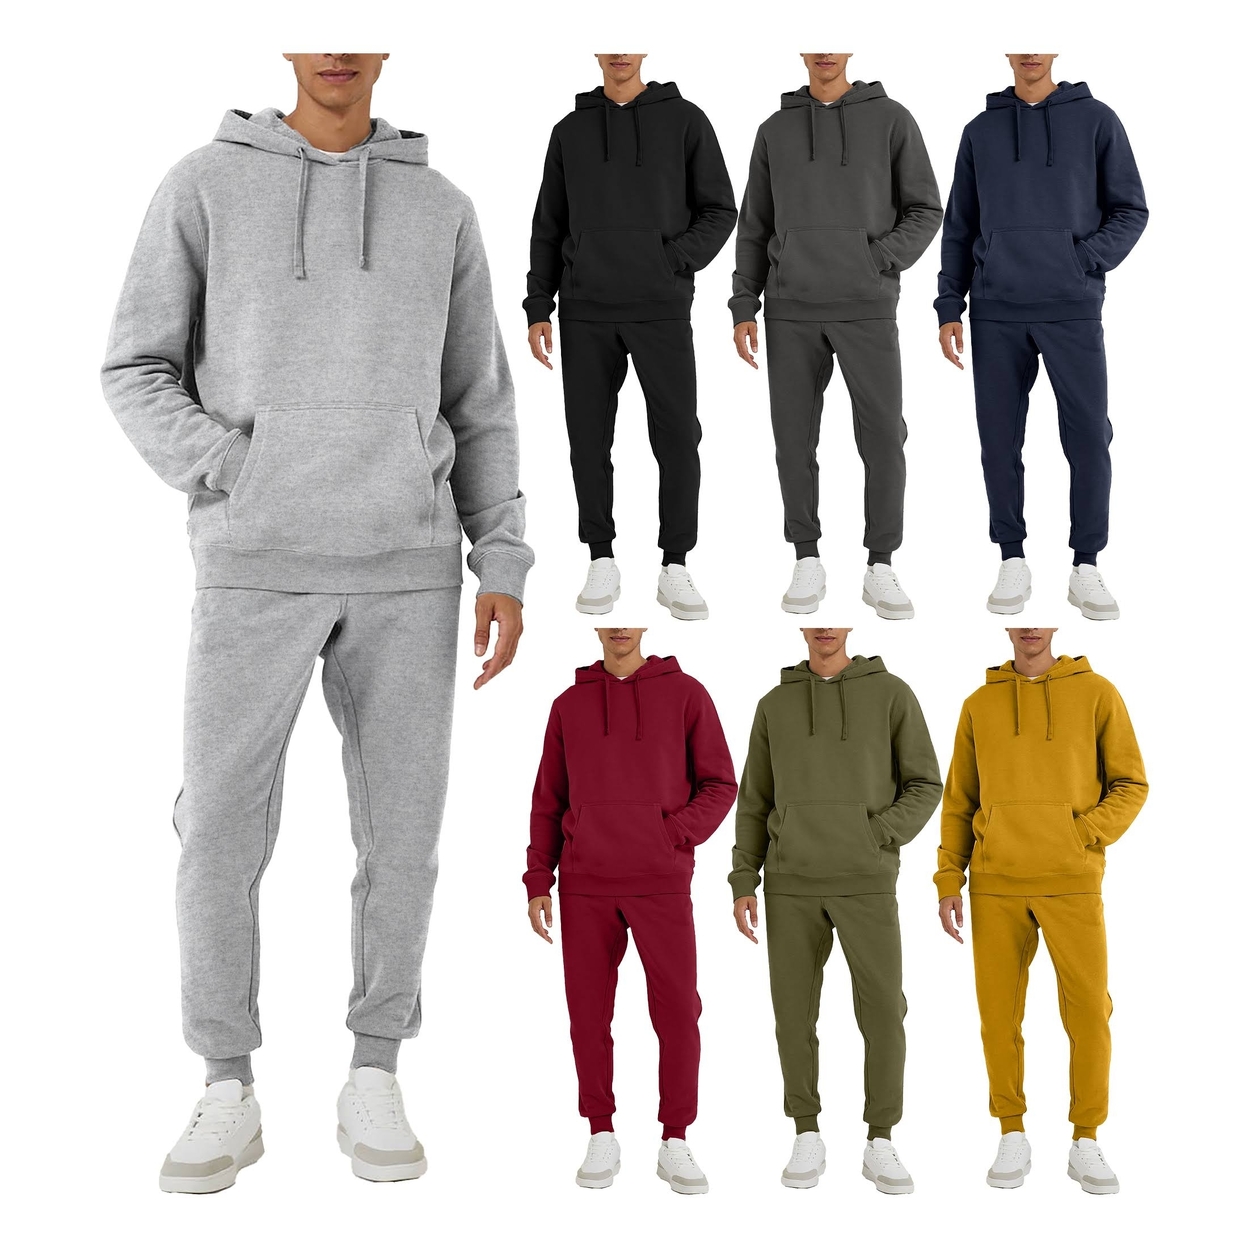 Multi-Pack: Men's Big & Tall Athletic Active Jogging Winter Warm Fleece Lined Pullover Tracksuit Set - Grey, 2-pack, 3xl